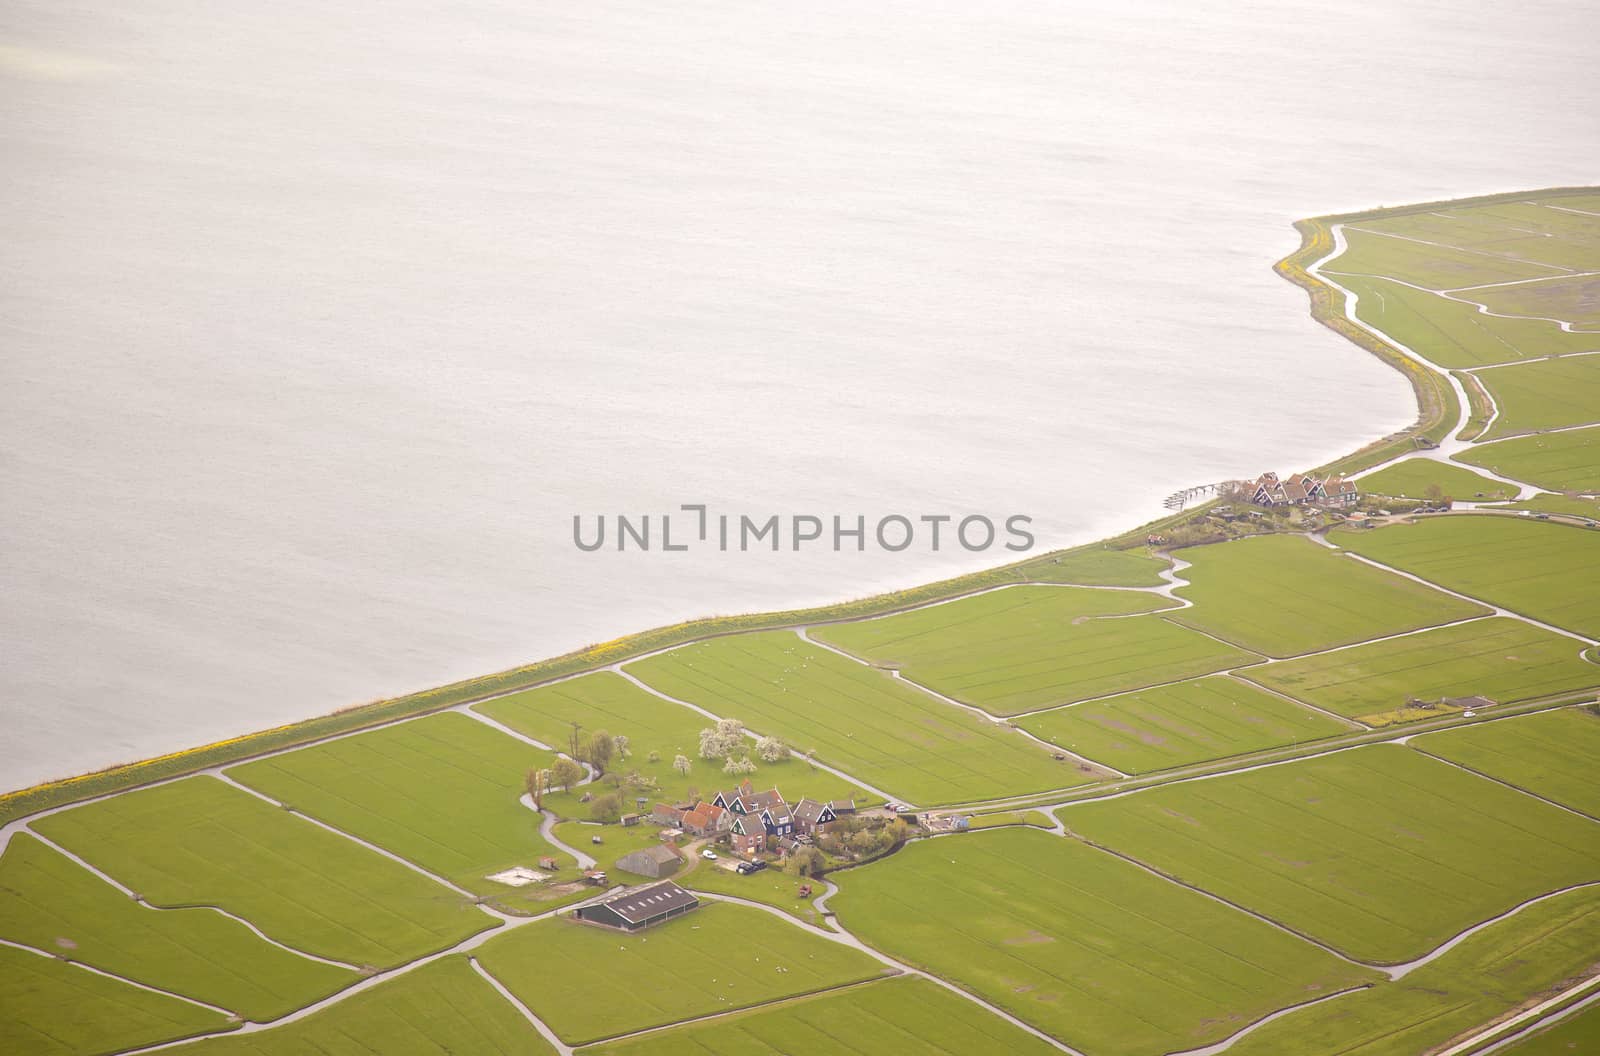 Aerial view of historic Marken island, The Netherlands by gigra